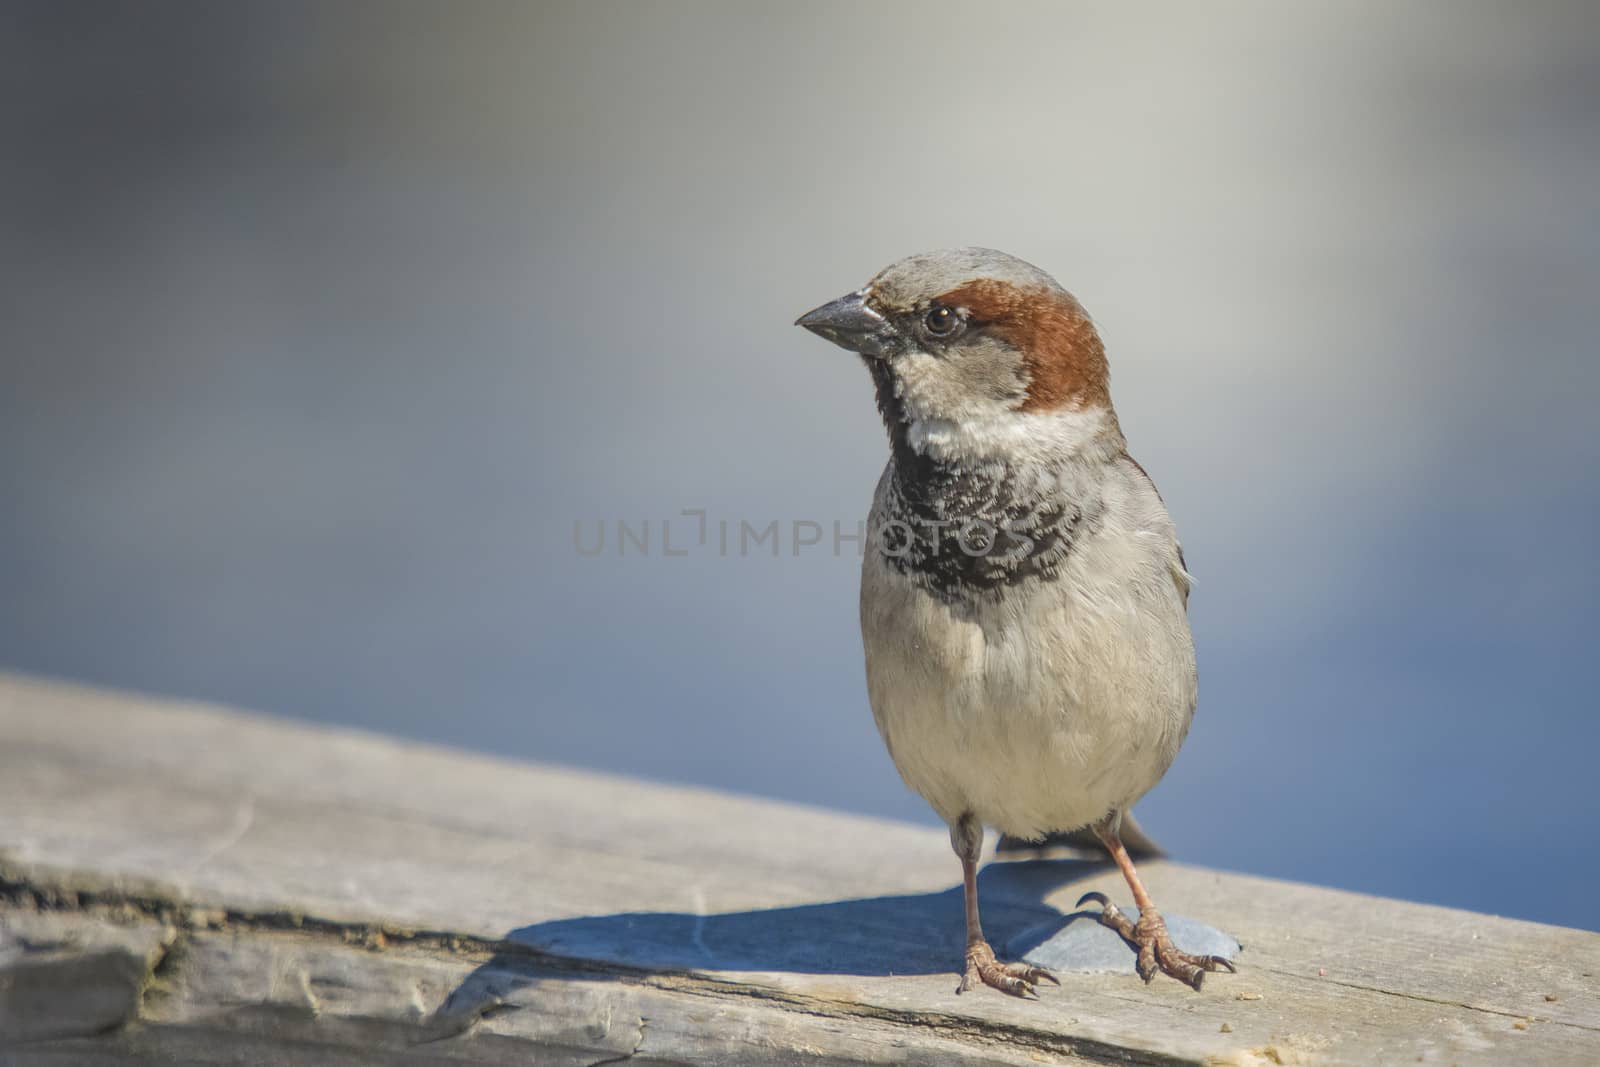 Went for a walk along the pier at the Tista river in Halden, Norway, the bird landed next to my side and I shot some really good pictures.